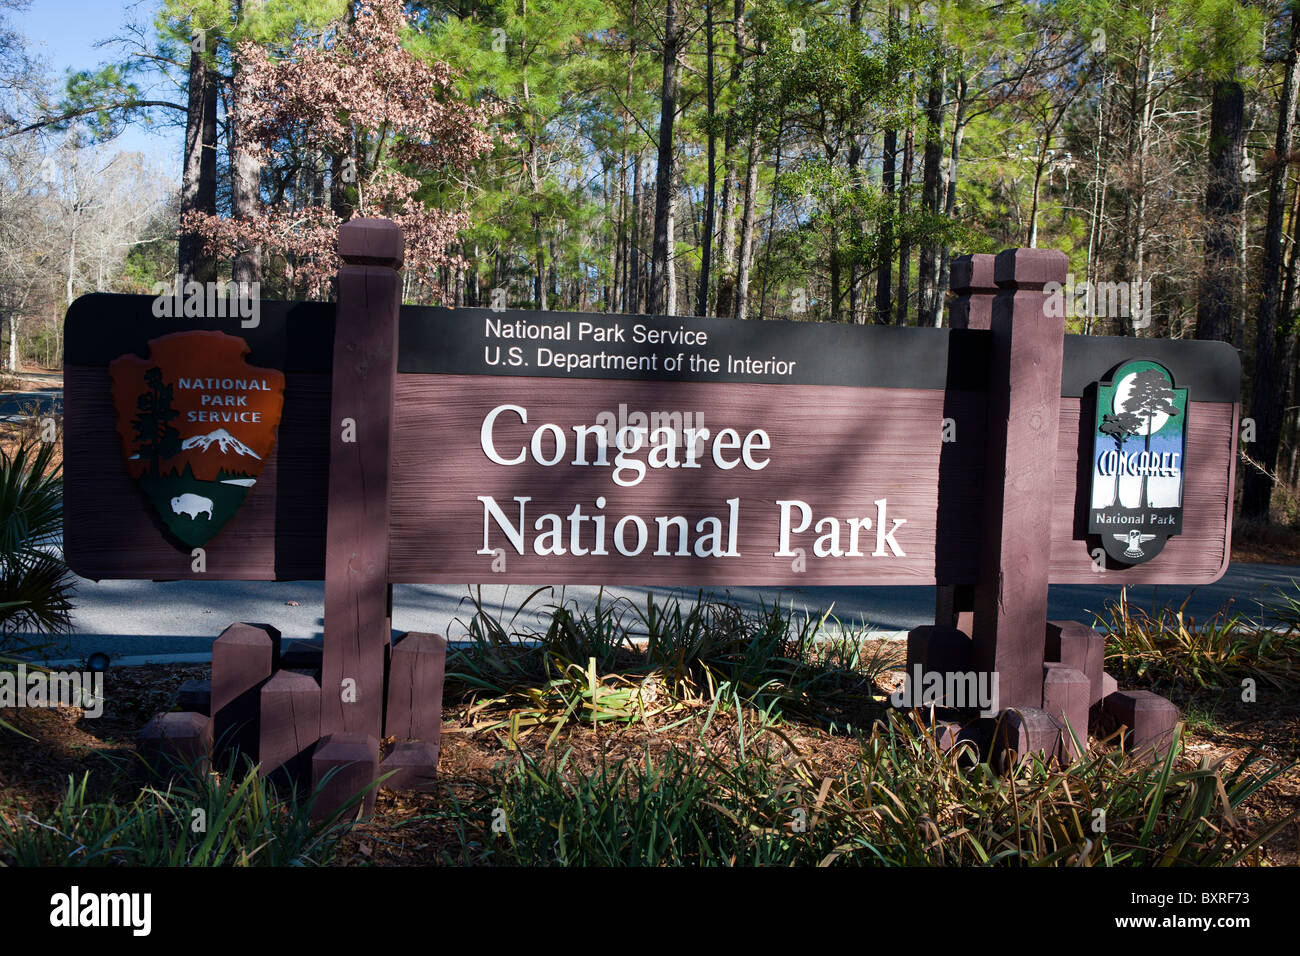 National Park Service sign for Congaree National Park, South Carolina, United States of America. Stock Photo